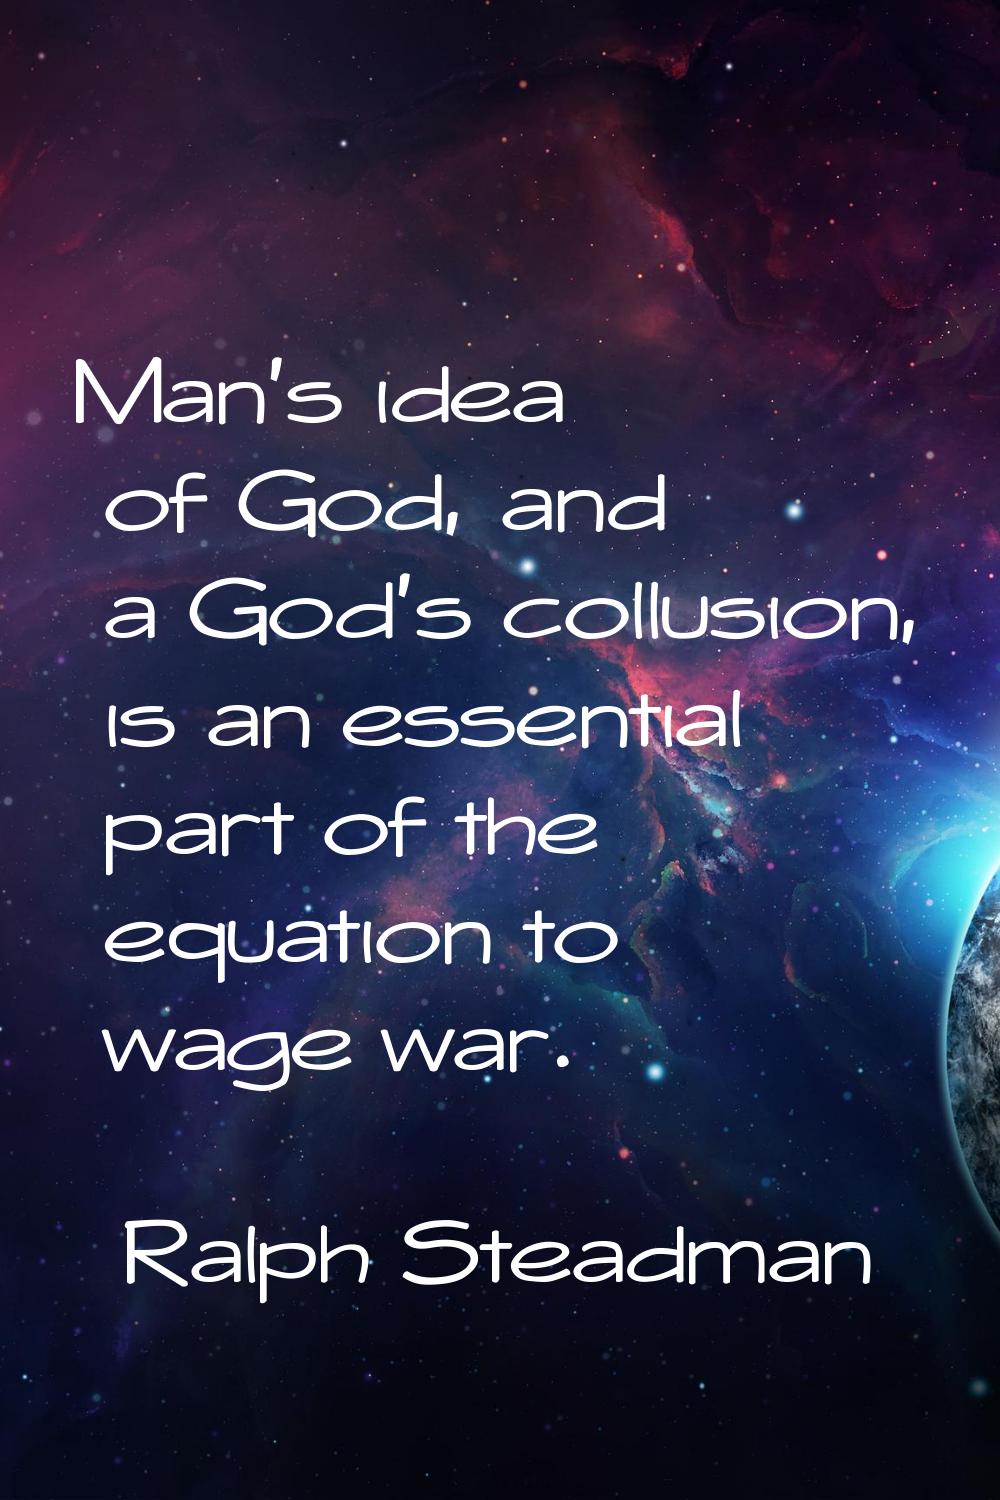 Man's idea of God, and a God's collusion, is an essential part of the equation to wage war.